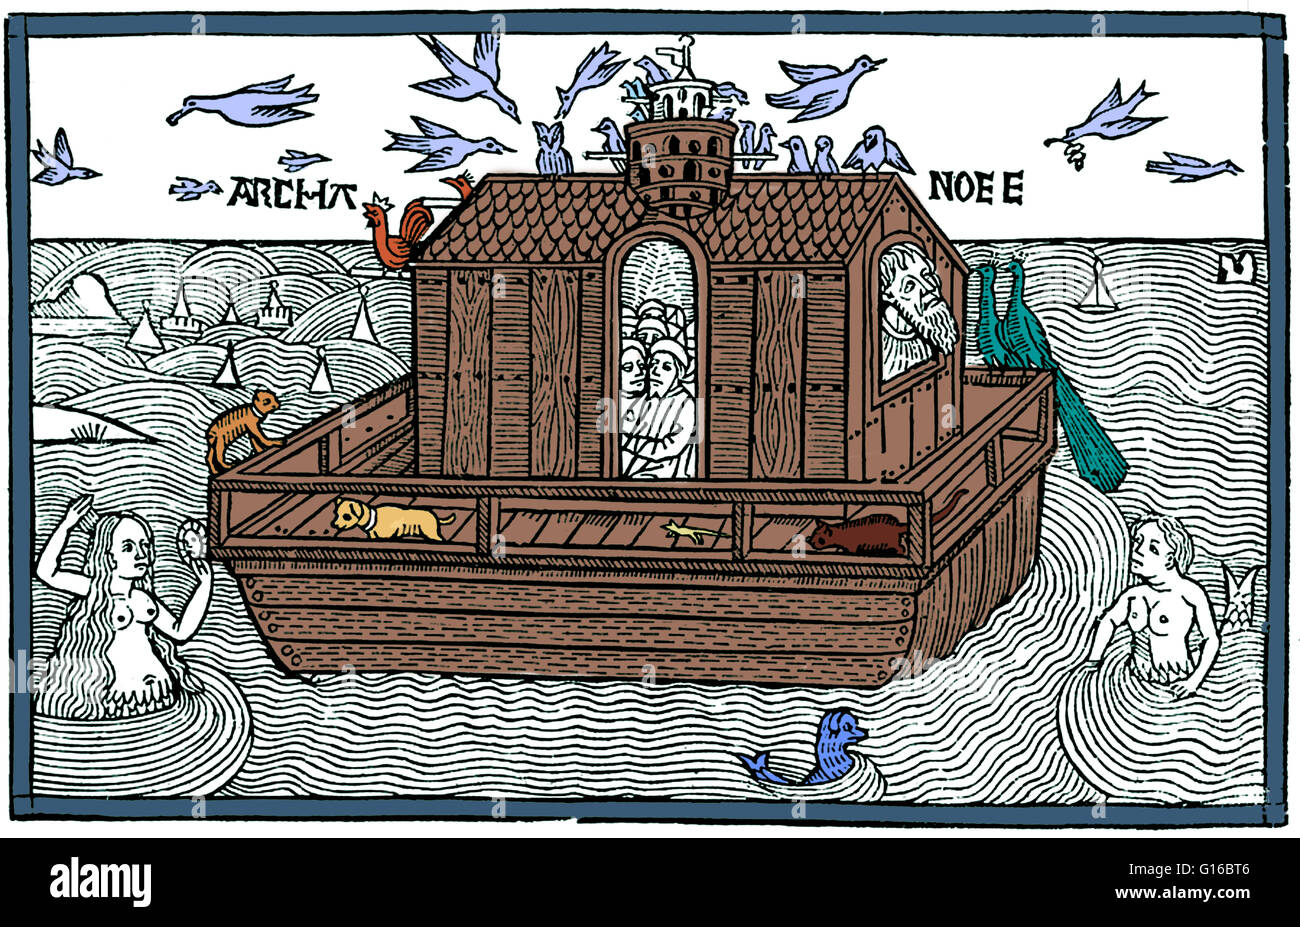 Color enhancement of a woodcut of Noah's Ark with merfolk from the Nuremberg Chronicle, 1493. Noah was the tenth and last of the antediluvian (pre-flood) Patriarchs. The story of Noah and the Ark is told in the Genesis flood narrative, and also told in Su Stock Photo